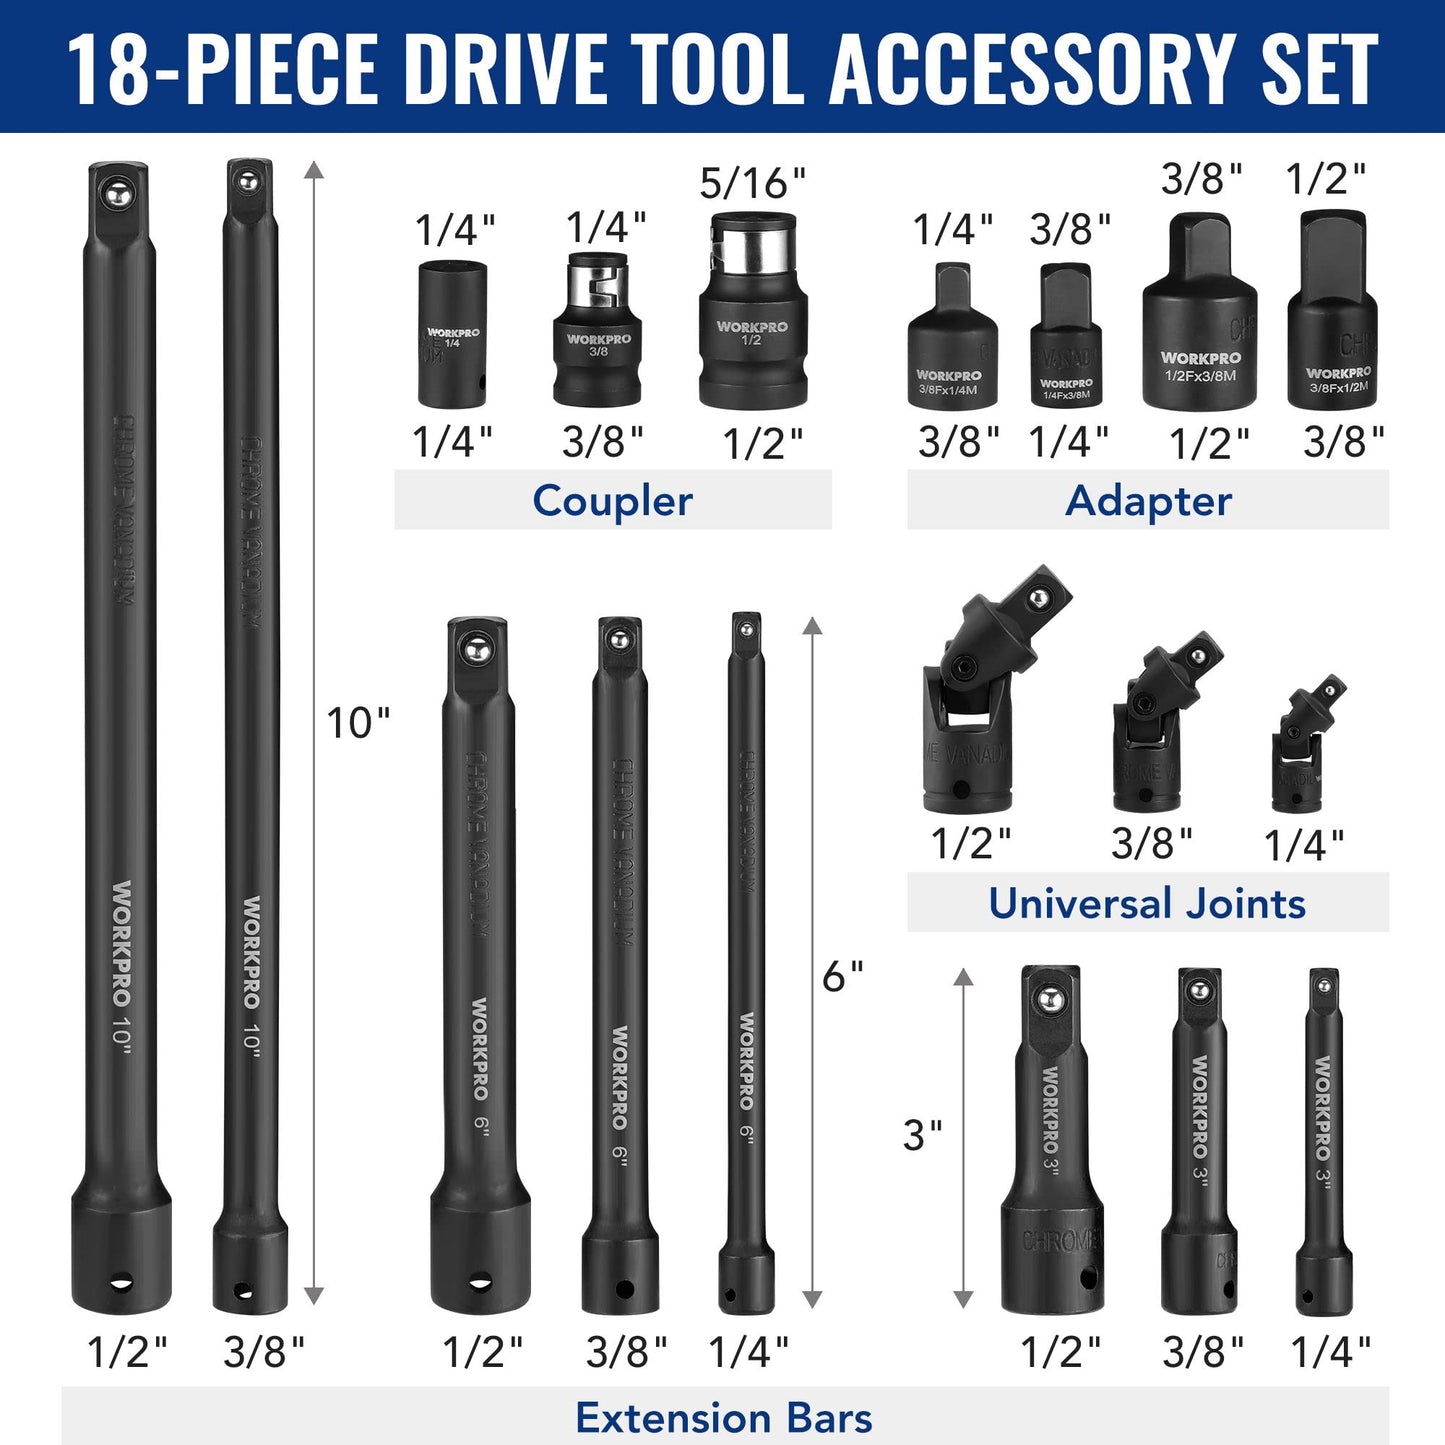 WORKPRO 18-Pieces Drive Tool Accessory Set, Includes Socket Adapters, Socket Extension Bar, Swivel Universal Joints and Impact Coupler, 1/4", 3/8" &